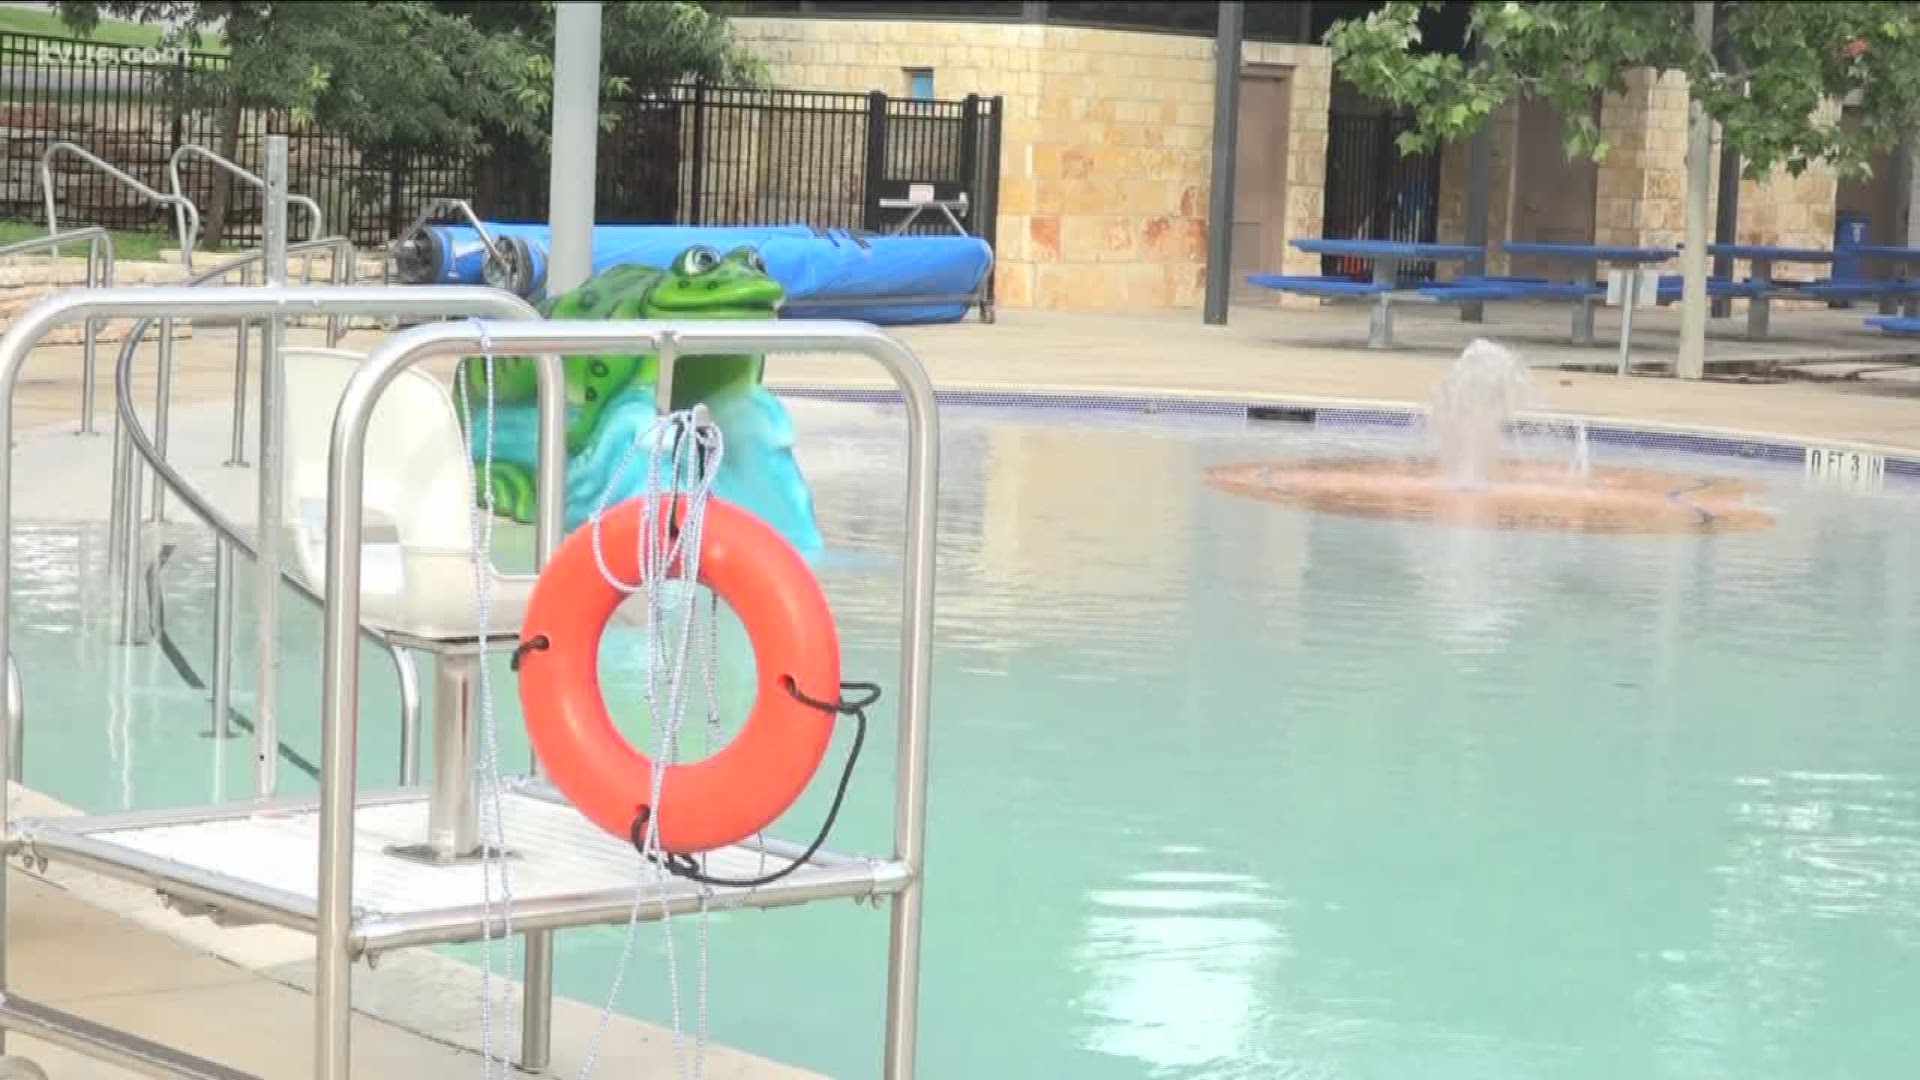 Now that summer break is here for most students in Central Texas, they may be looking for a summer job. The City of Austin is dealing with a lifeguard shortage.